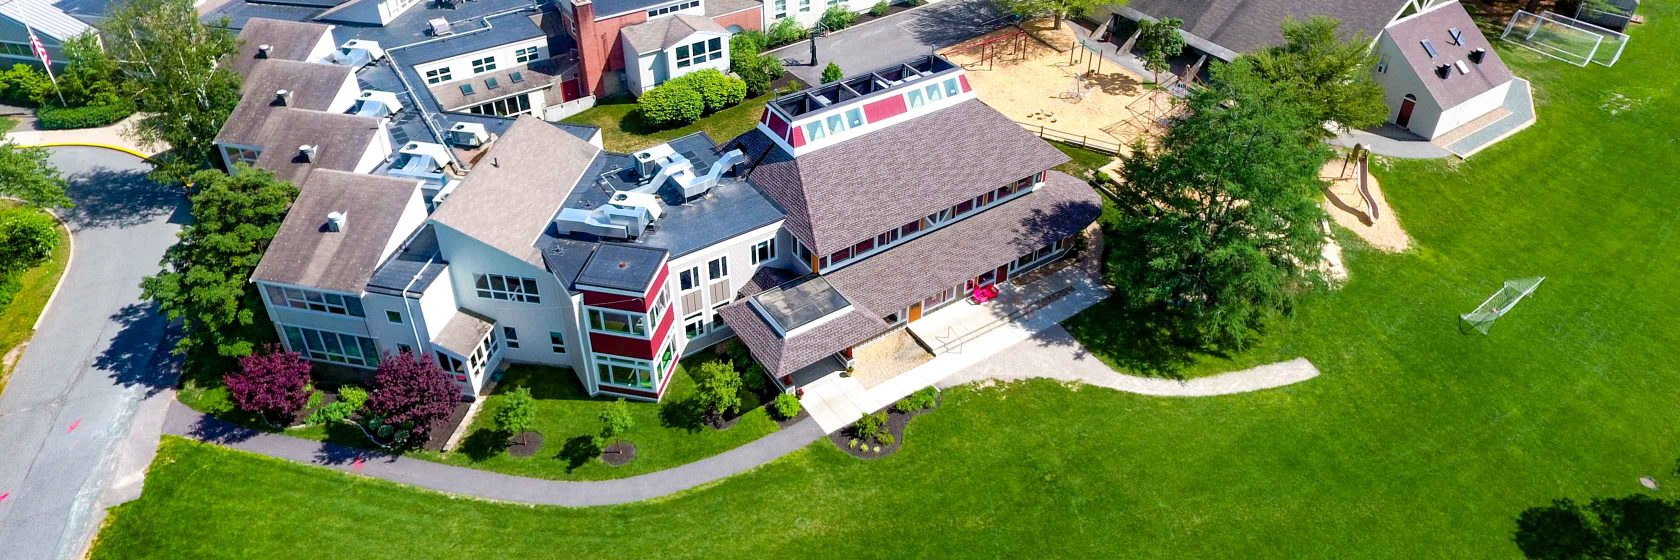 An aerial view of the Dedham Country Day School campus.